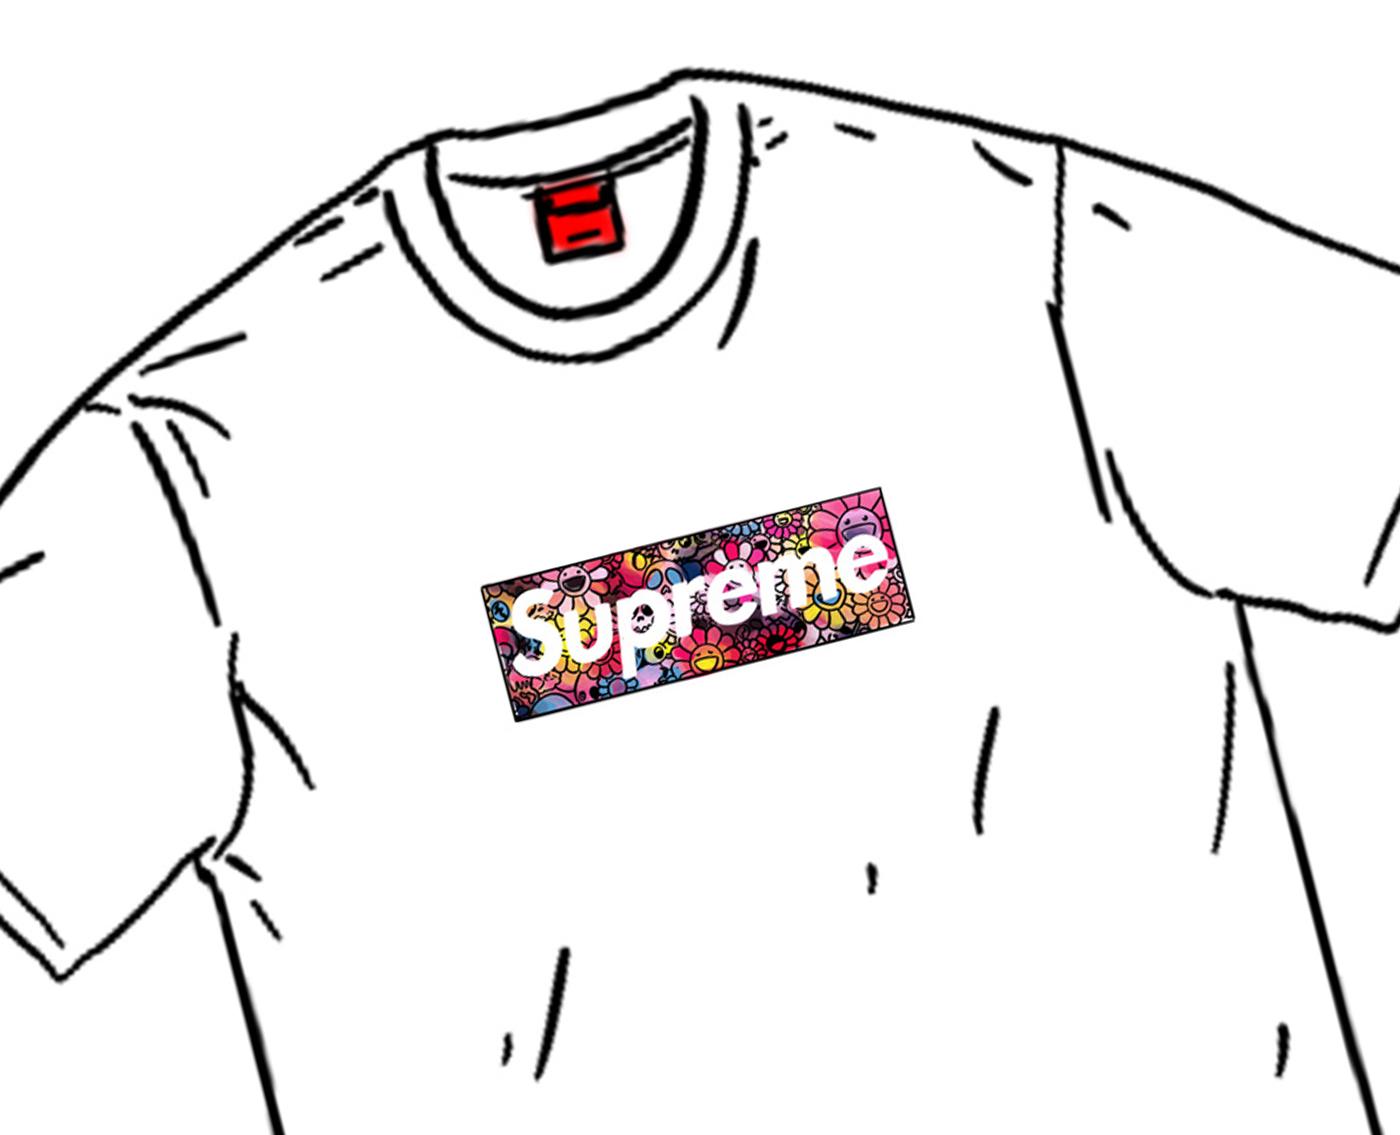 StockX on X: Tomorrow, Supreme will be releasing their Takashi Murakami x  Supreme Box Logo Tee, with all proceeds being donated to charity. As big  fans of Takashi and Supreme, we're proud